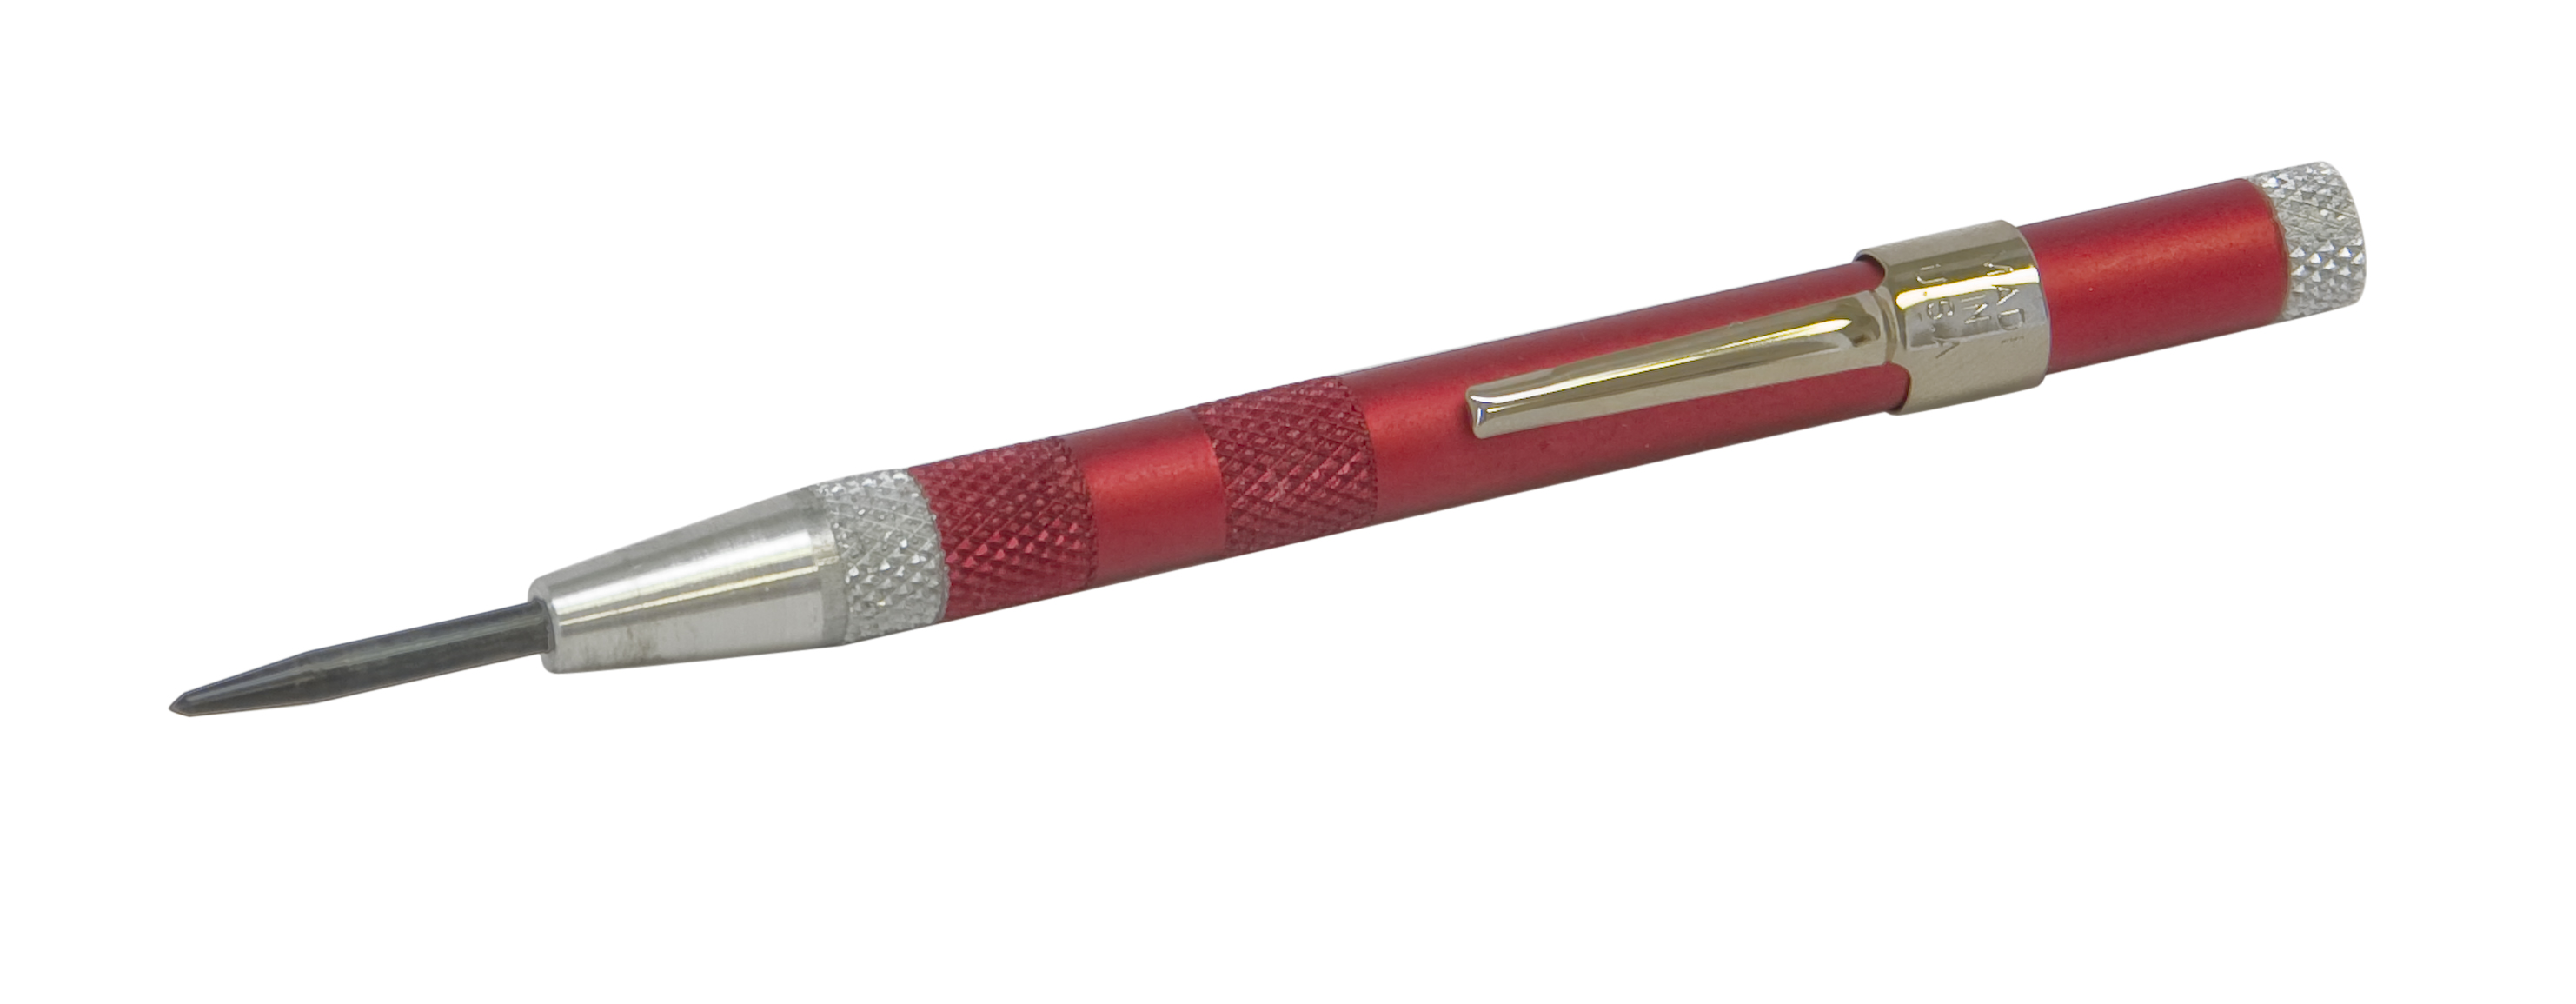 Spring loaded brass center punch – Proof Fly Fishing